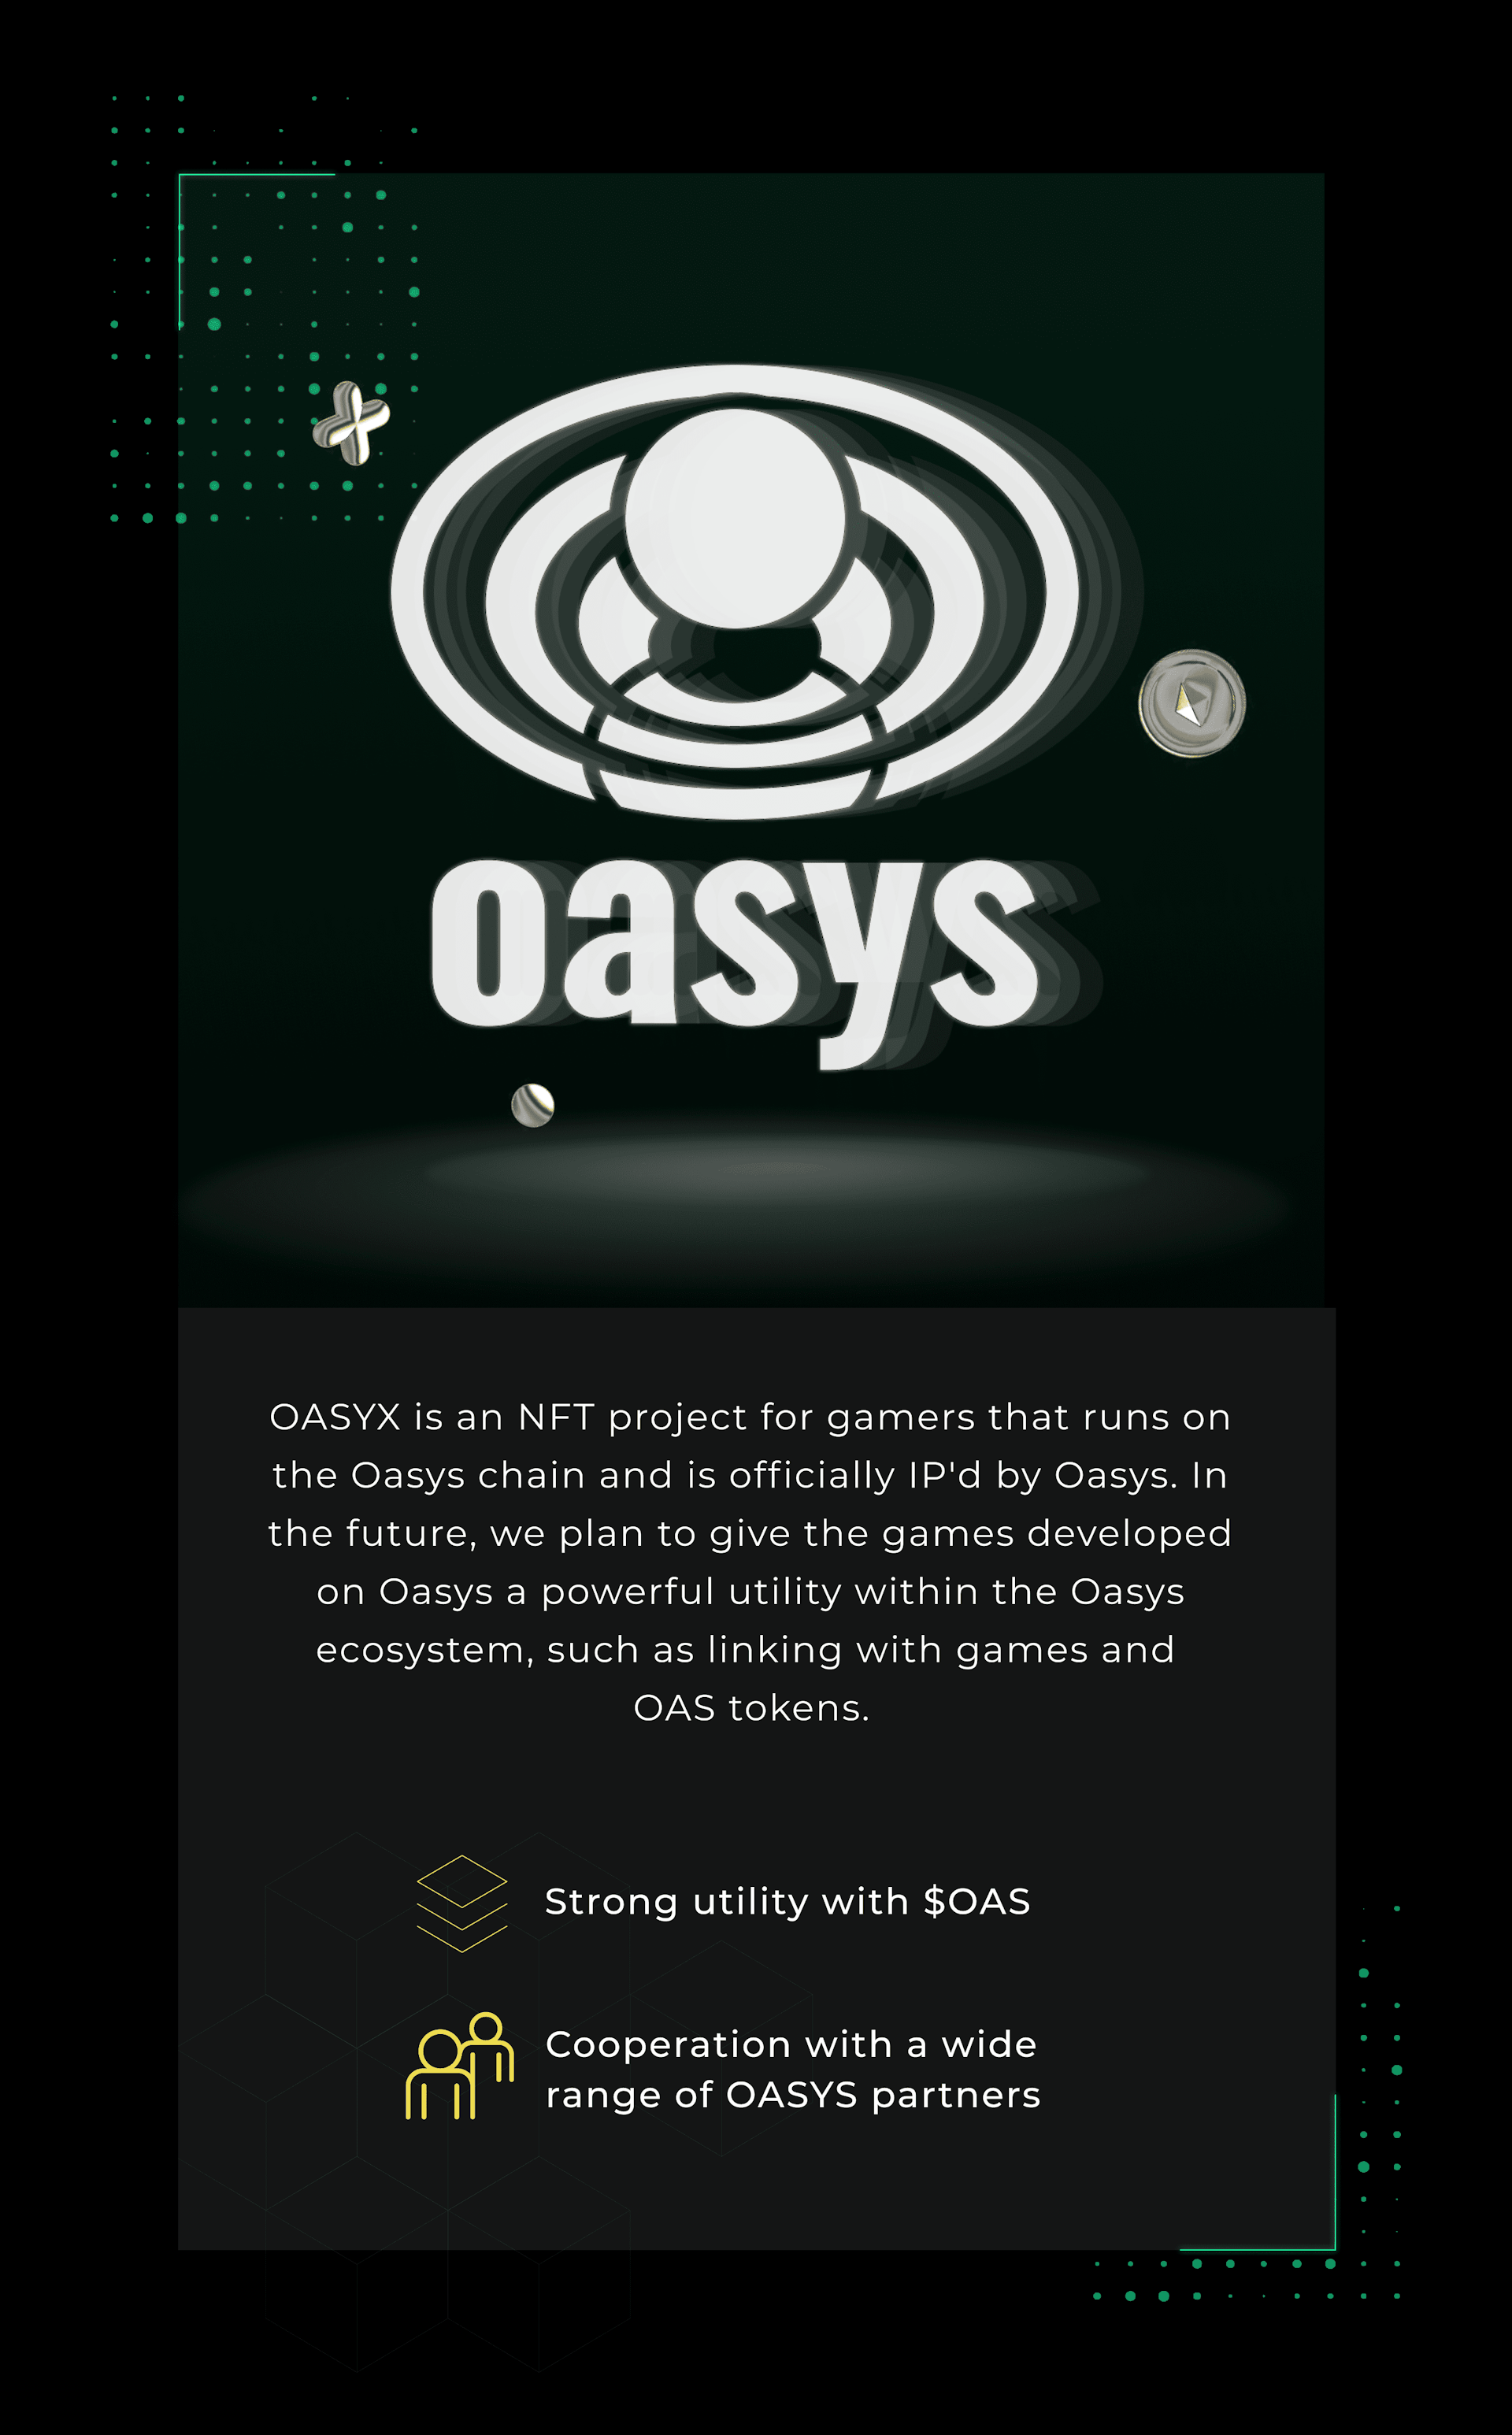 OFFICIAL OPERATED BY OASYS